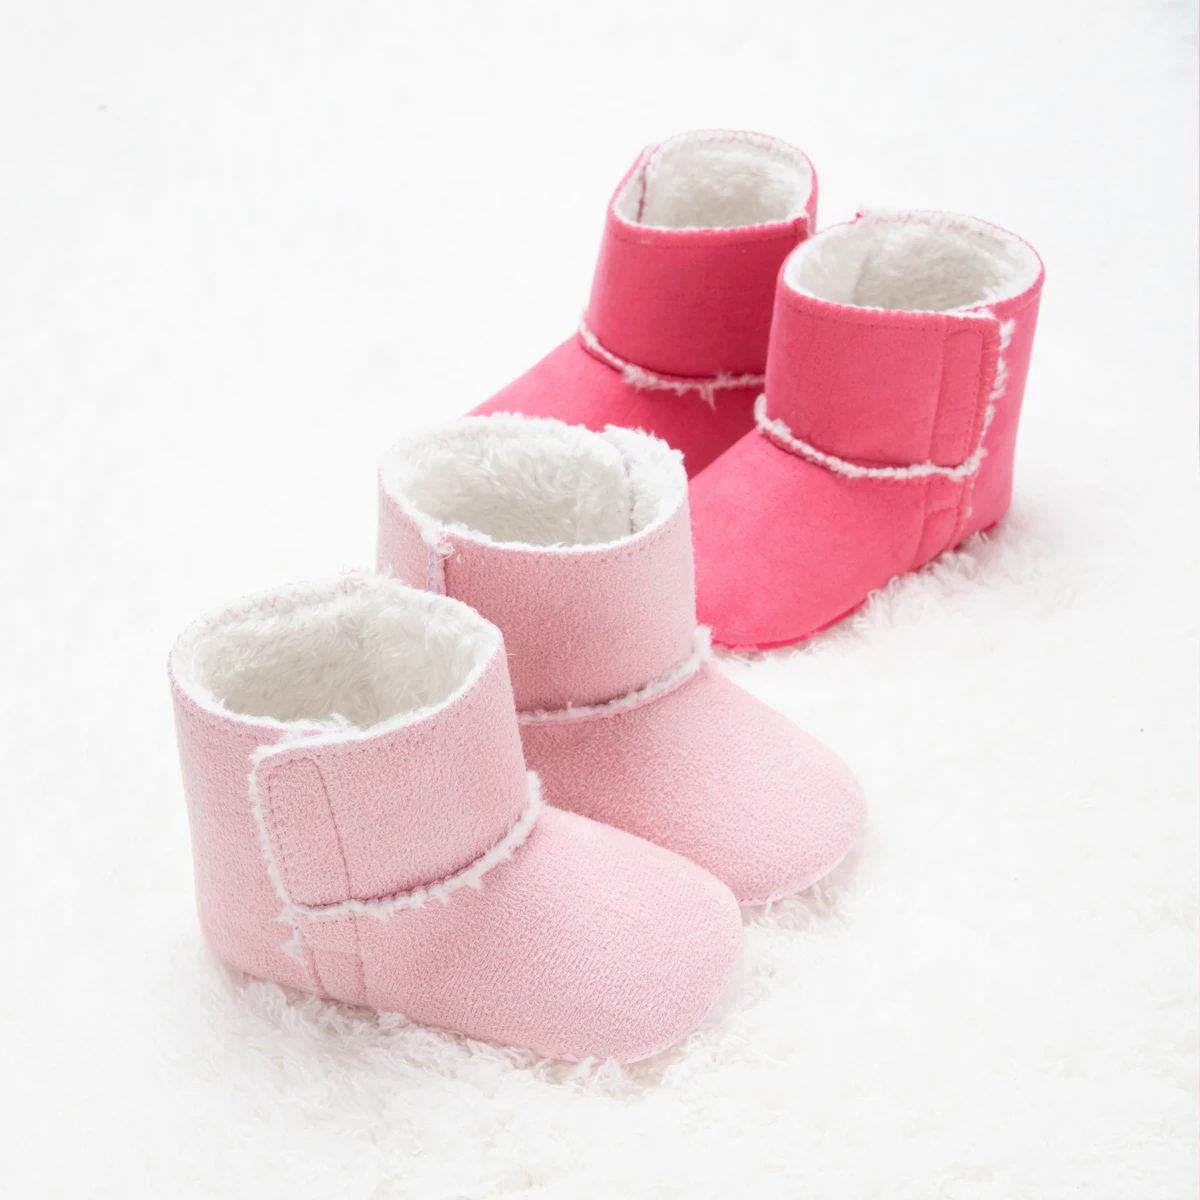 MOQ 1 New fashion designs Cotton base fabric is comfortable Anti-slip sole Suitable for indoor activities Baby winter boots, 2 colors